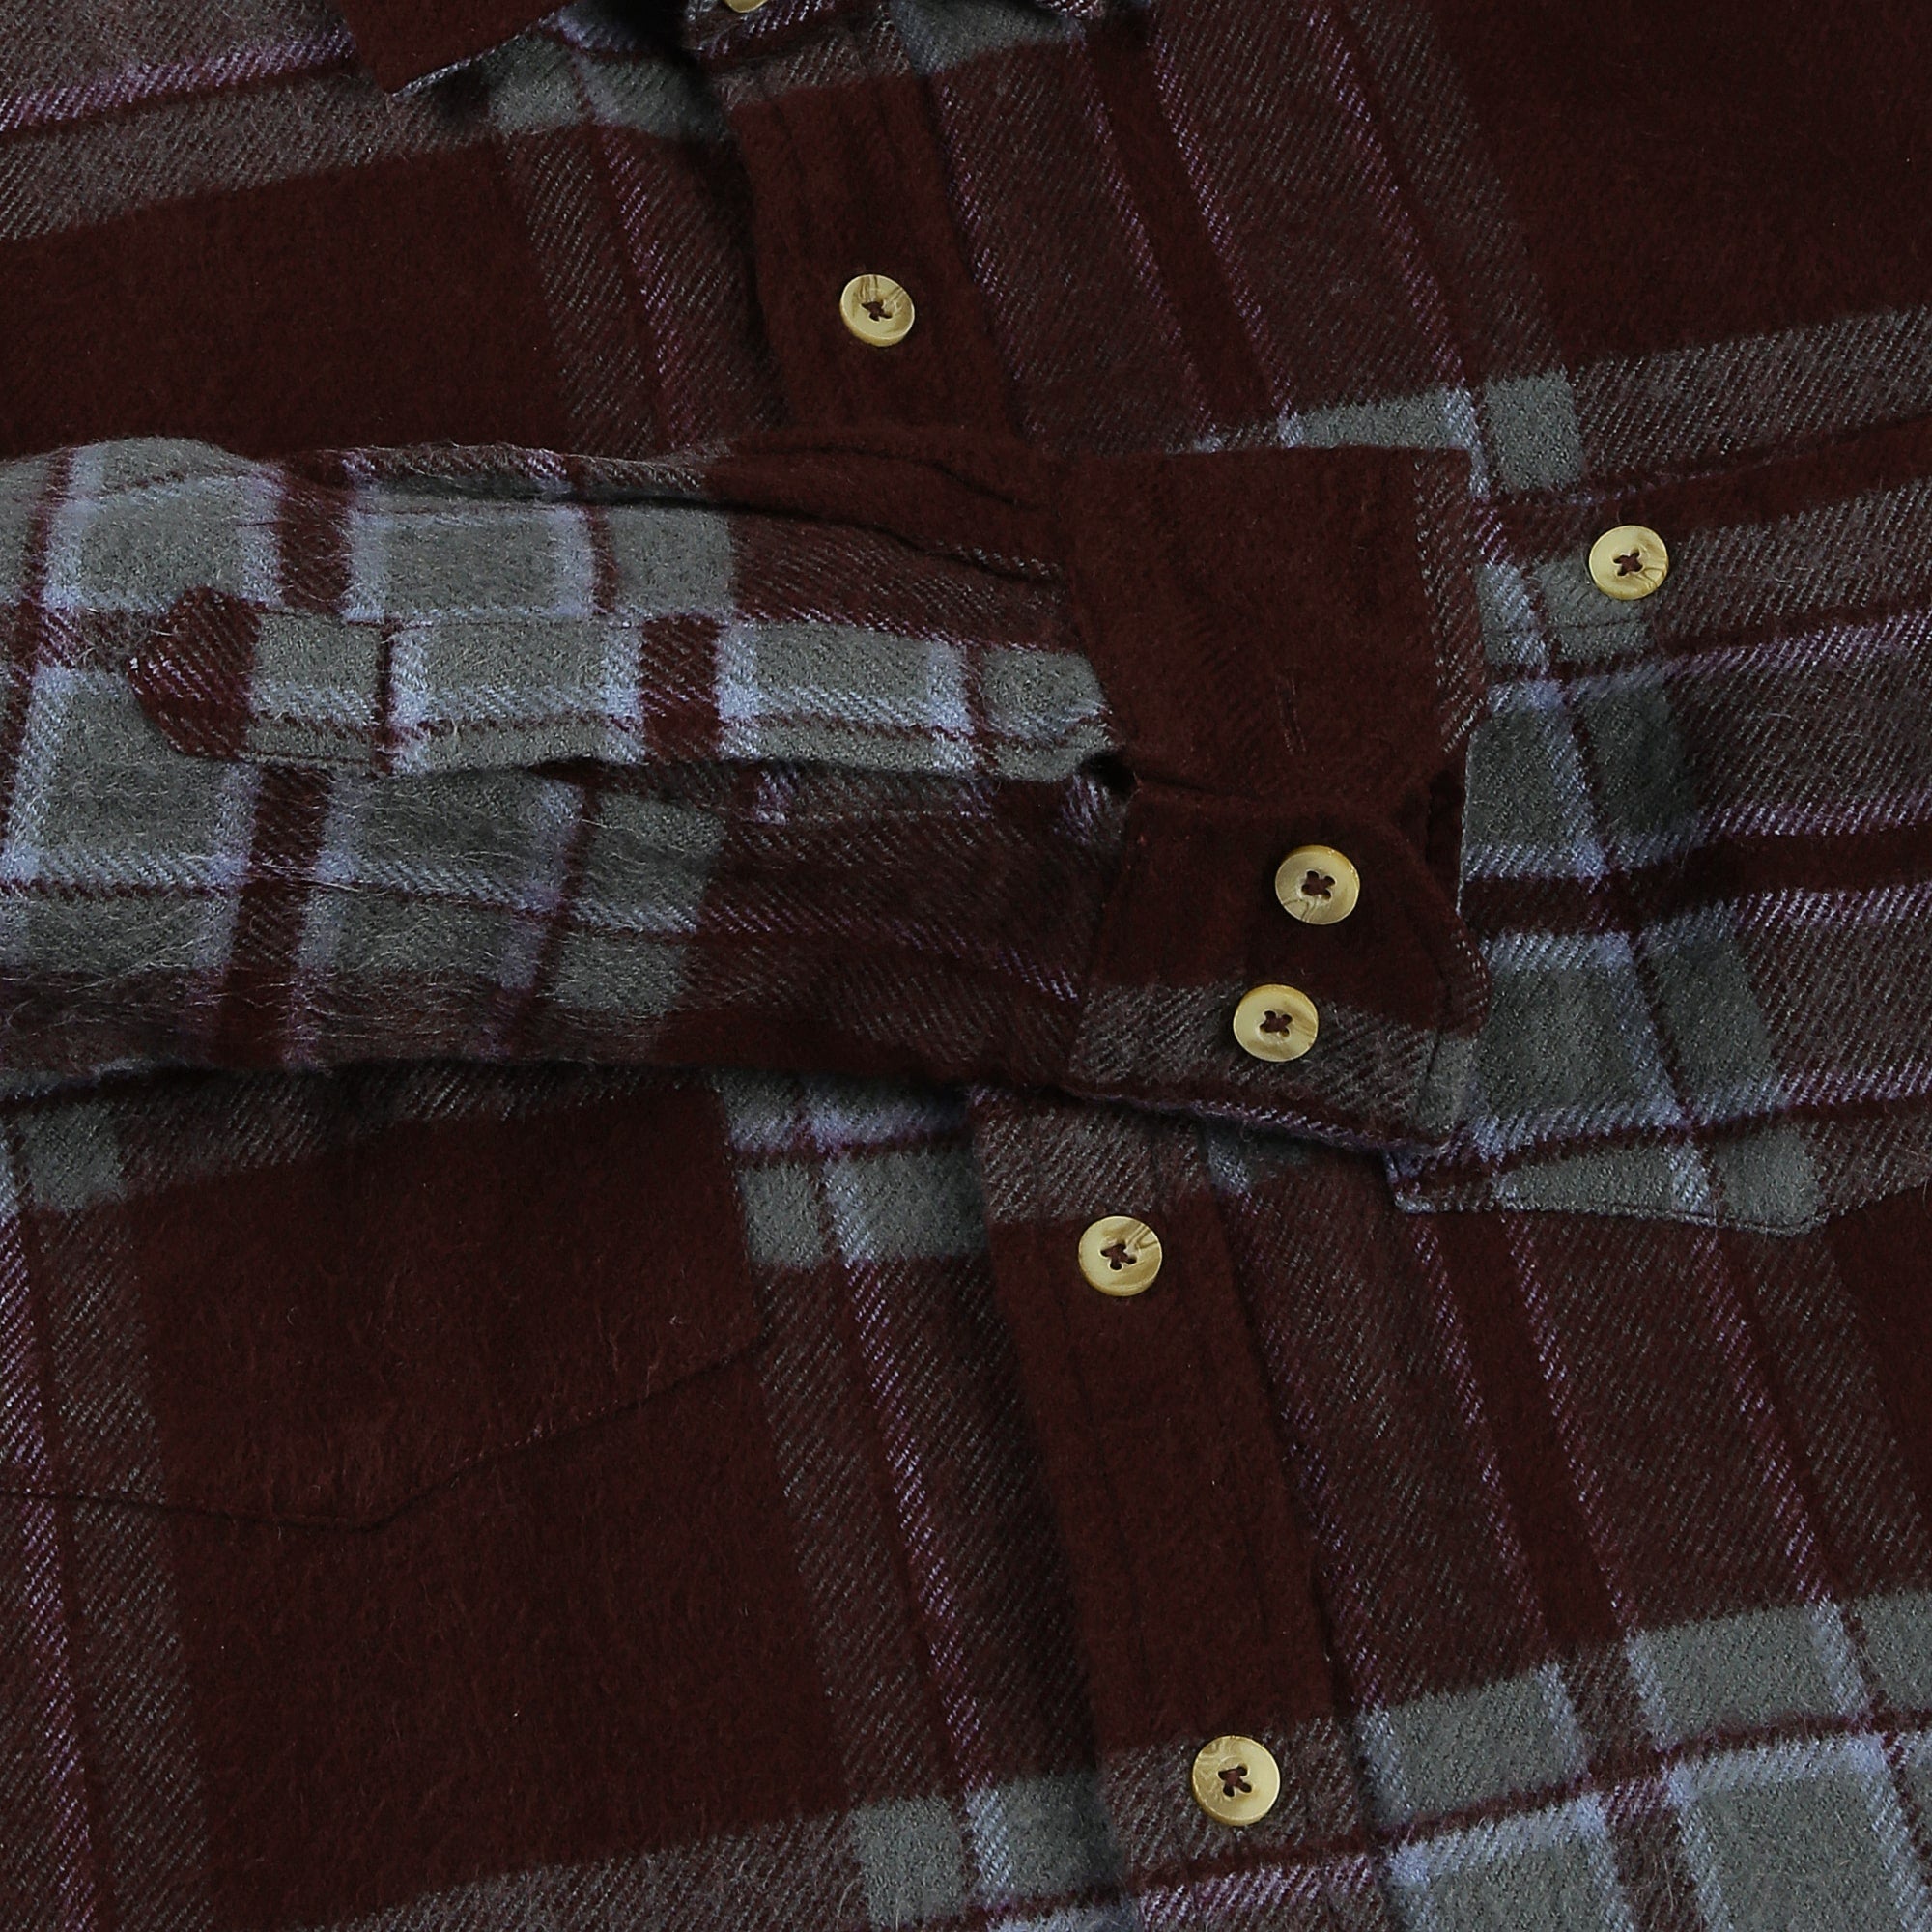 LUMBER WINTER CHECK SHIRT IN WINE - The Formal Club